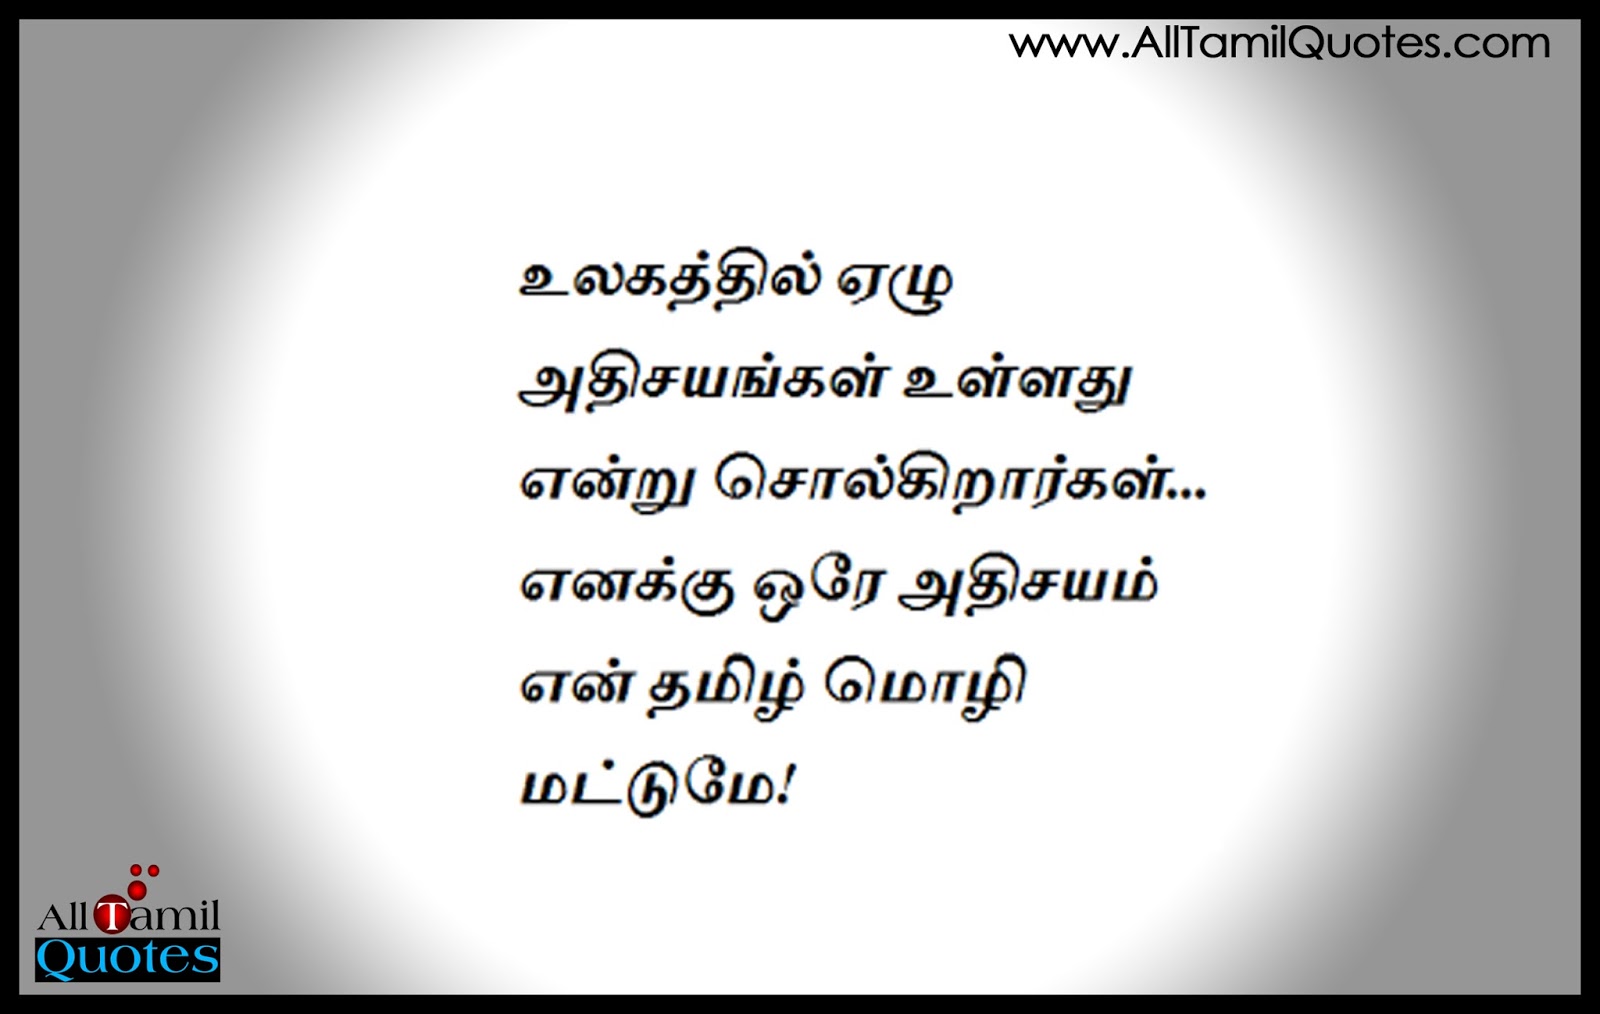 Best Tamil Quotes and Sayings